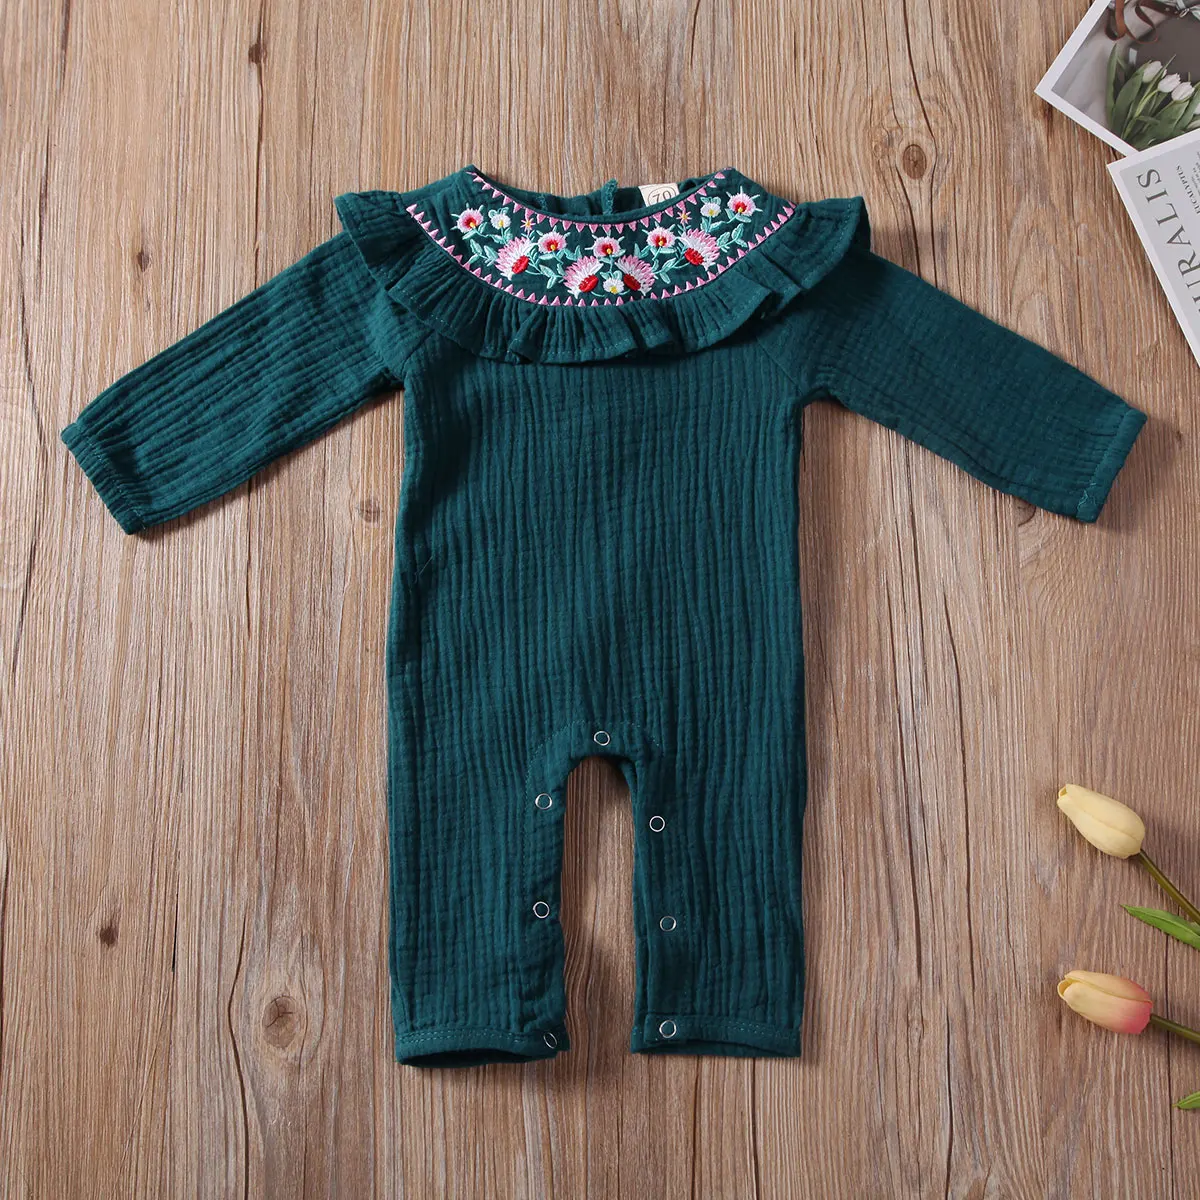 

Pudcoco Newborn Baby Girl Clothes Solid Color Flower Print Ruffle Long Sleeve Knitted Cotton Romper Jumpsuit Clothes